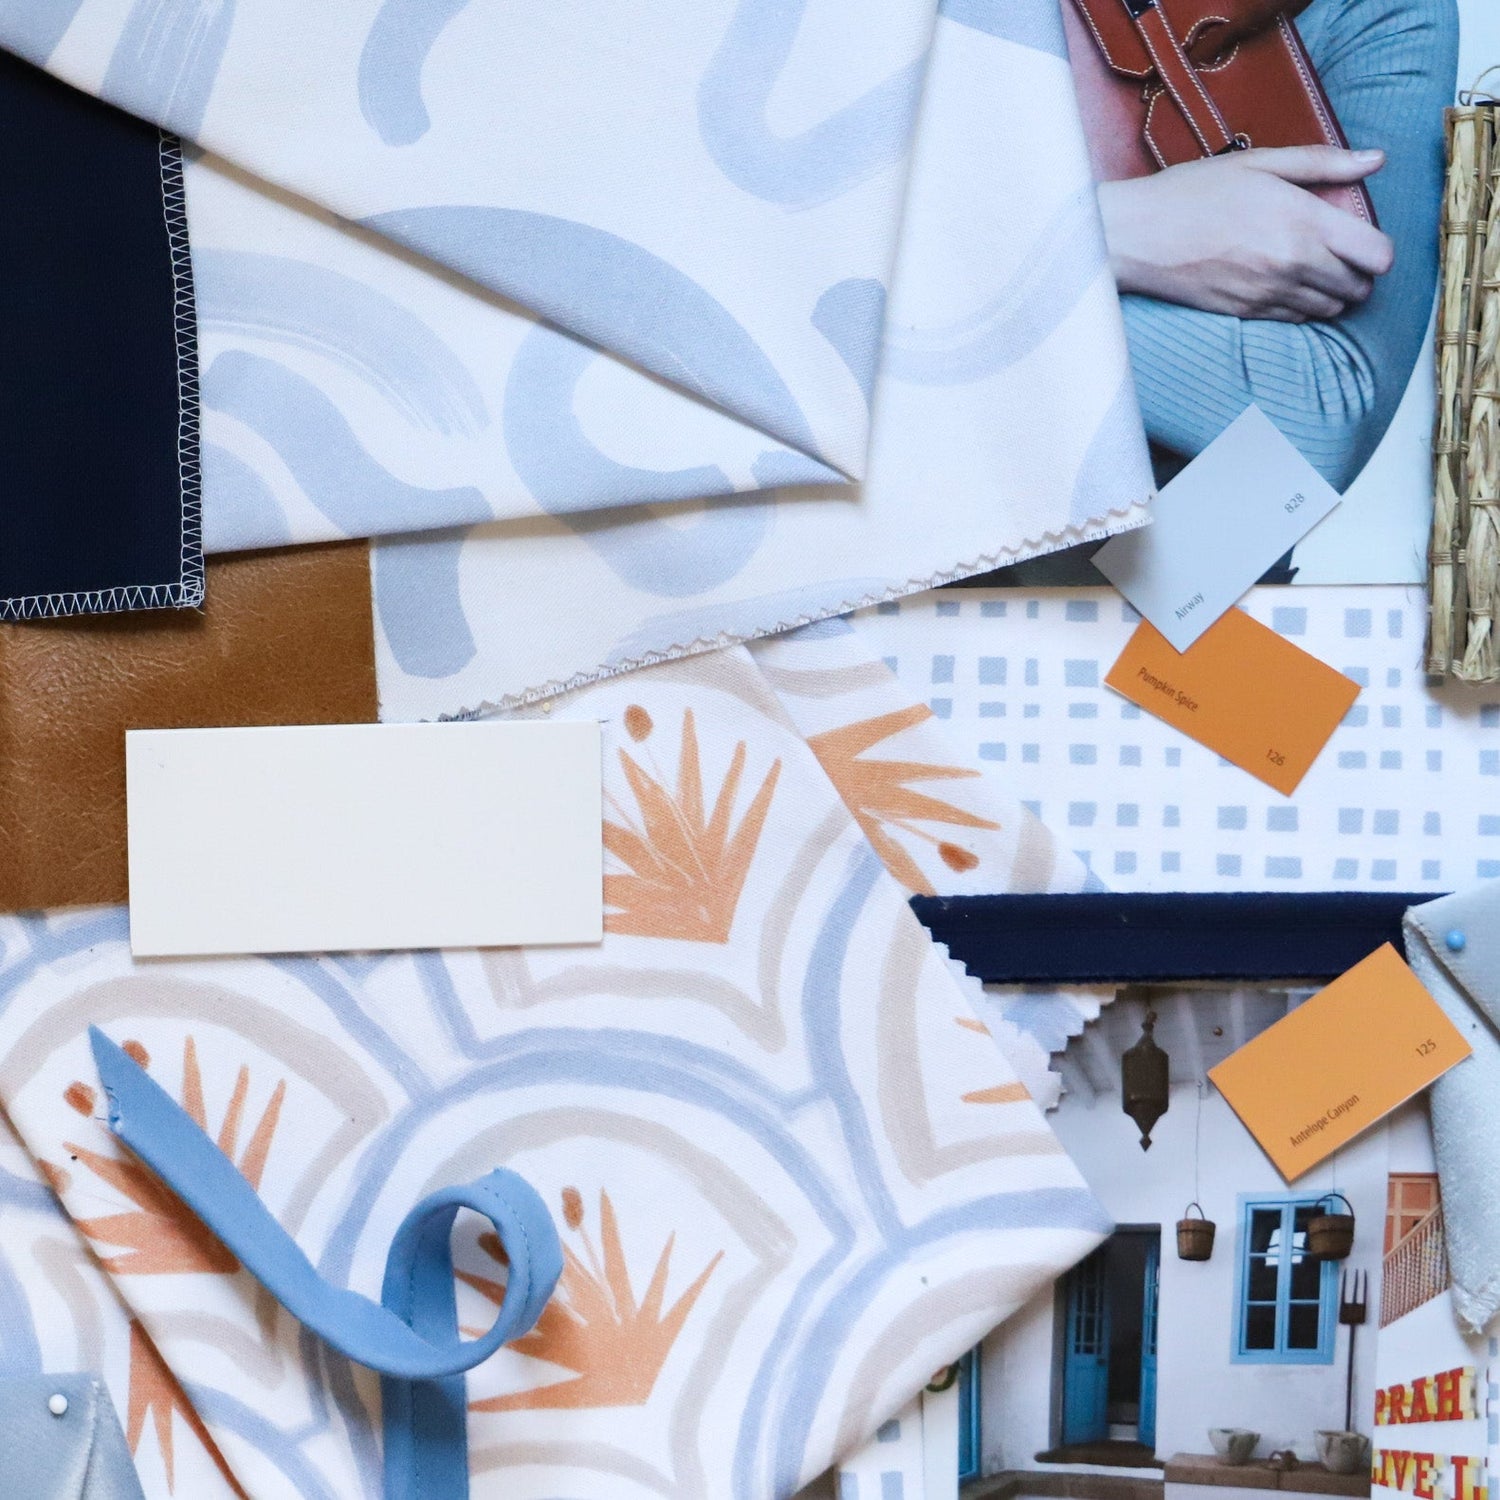 Interior design moodboard and fabric inspirations with Sky Blue Pattern Printed swatch, Art Deco Palm Pattern Printed Swatch, and Sky Blue Printed Swatch